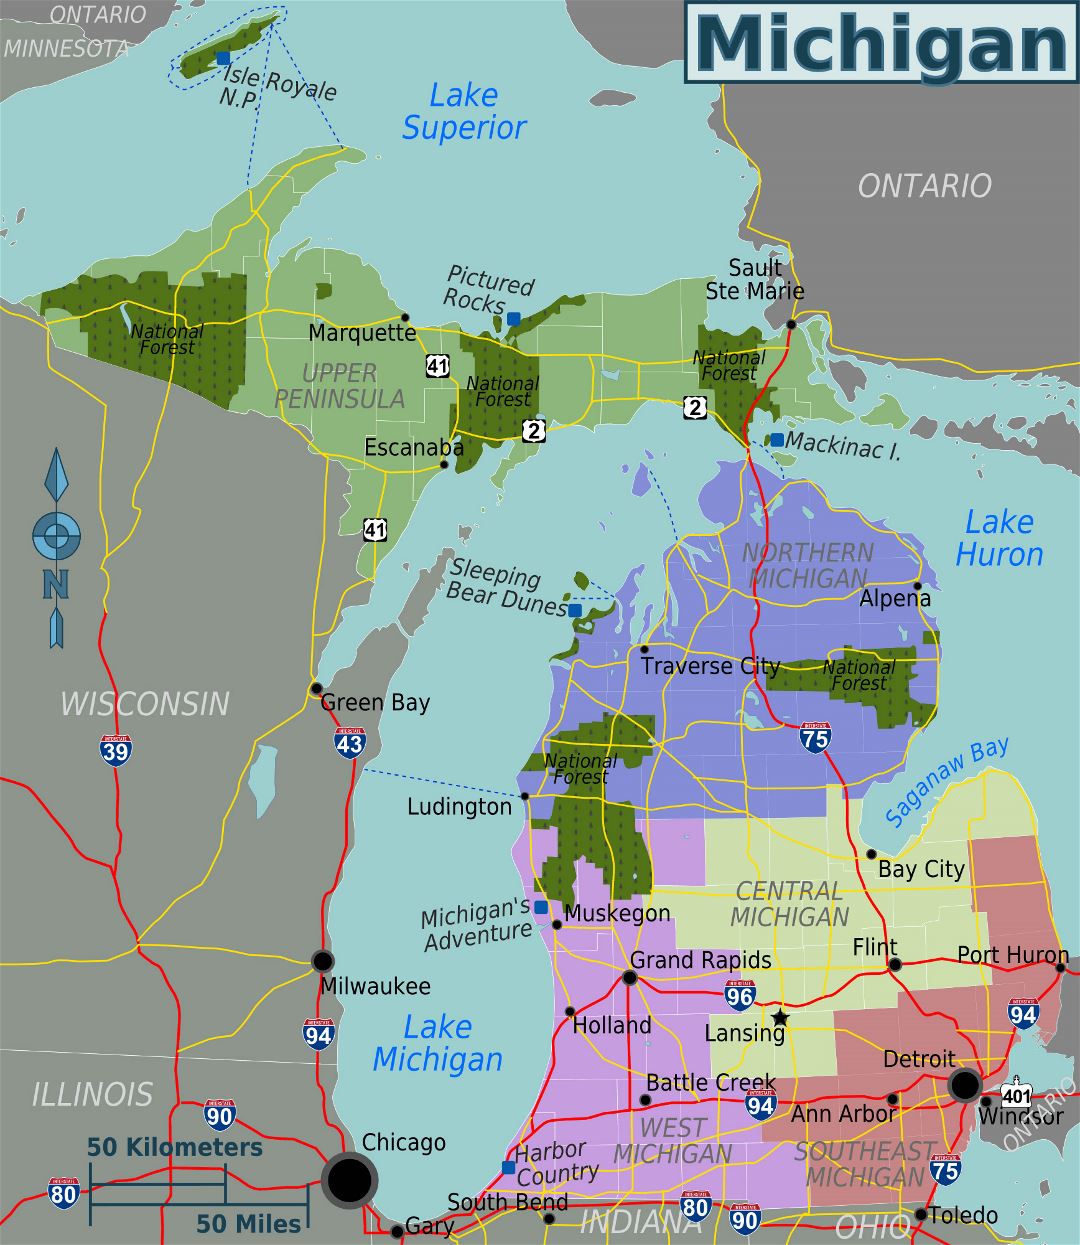 Large regions map of Michigan state